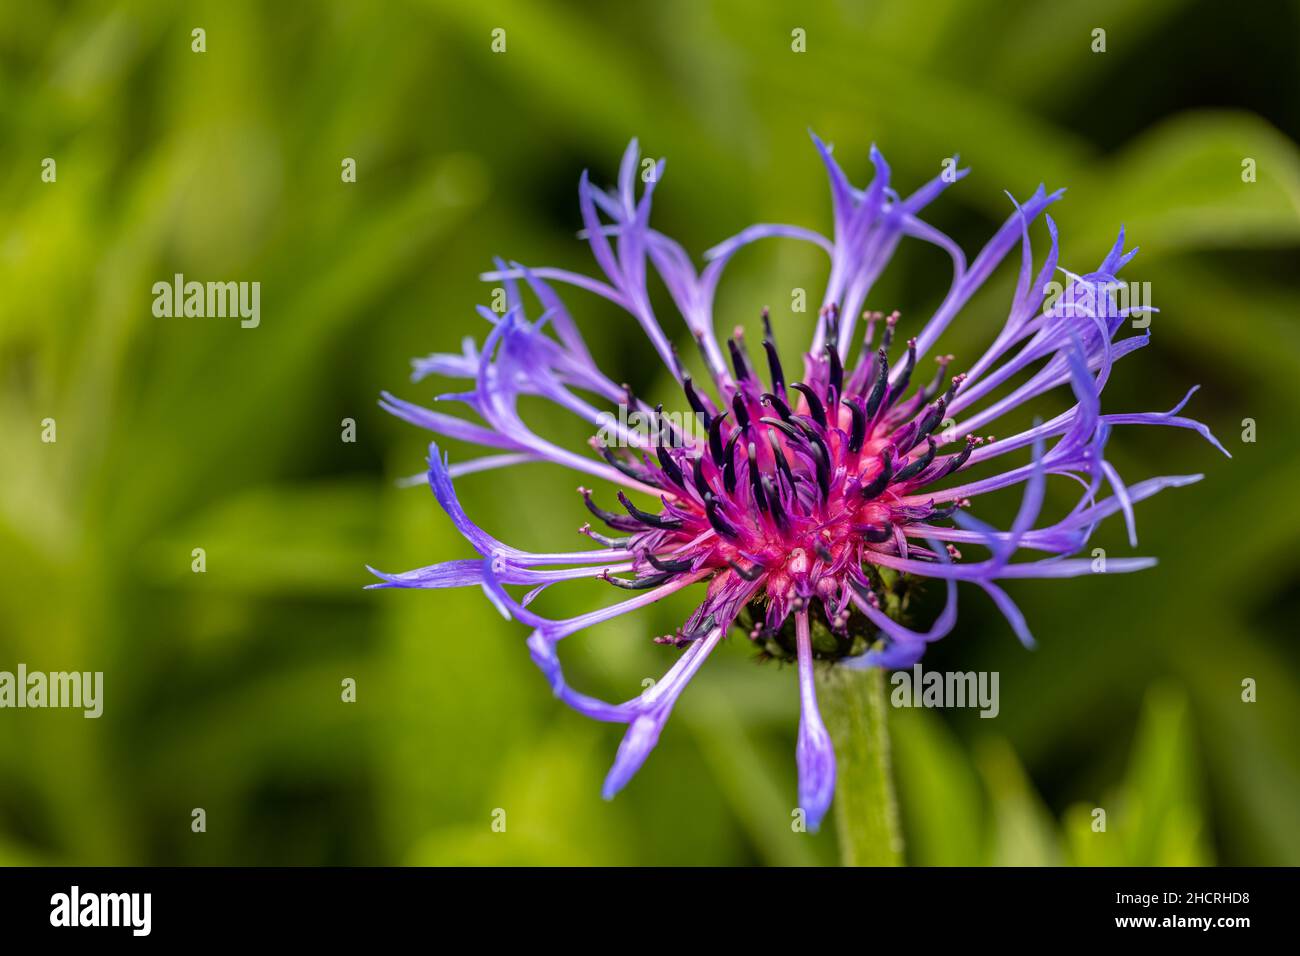 Close up view of a pink and purple spring flower Stock Photo